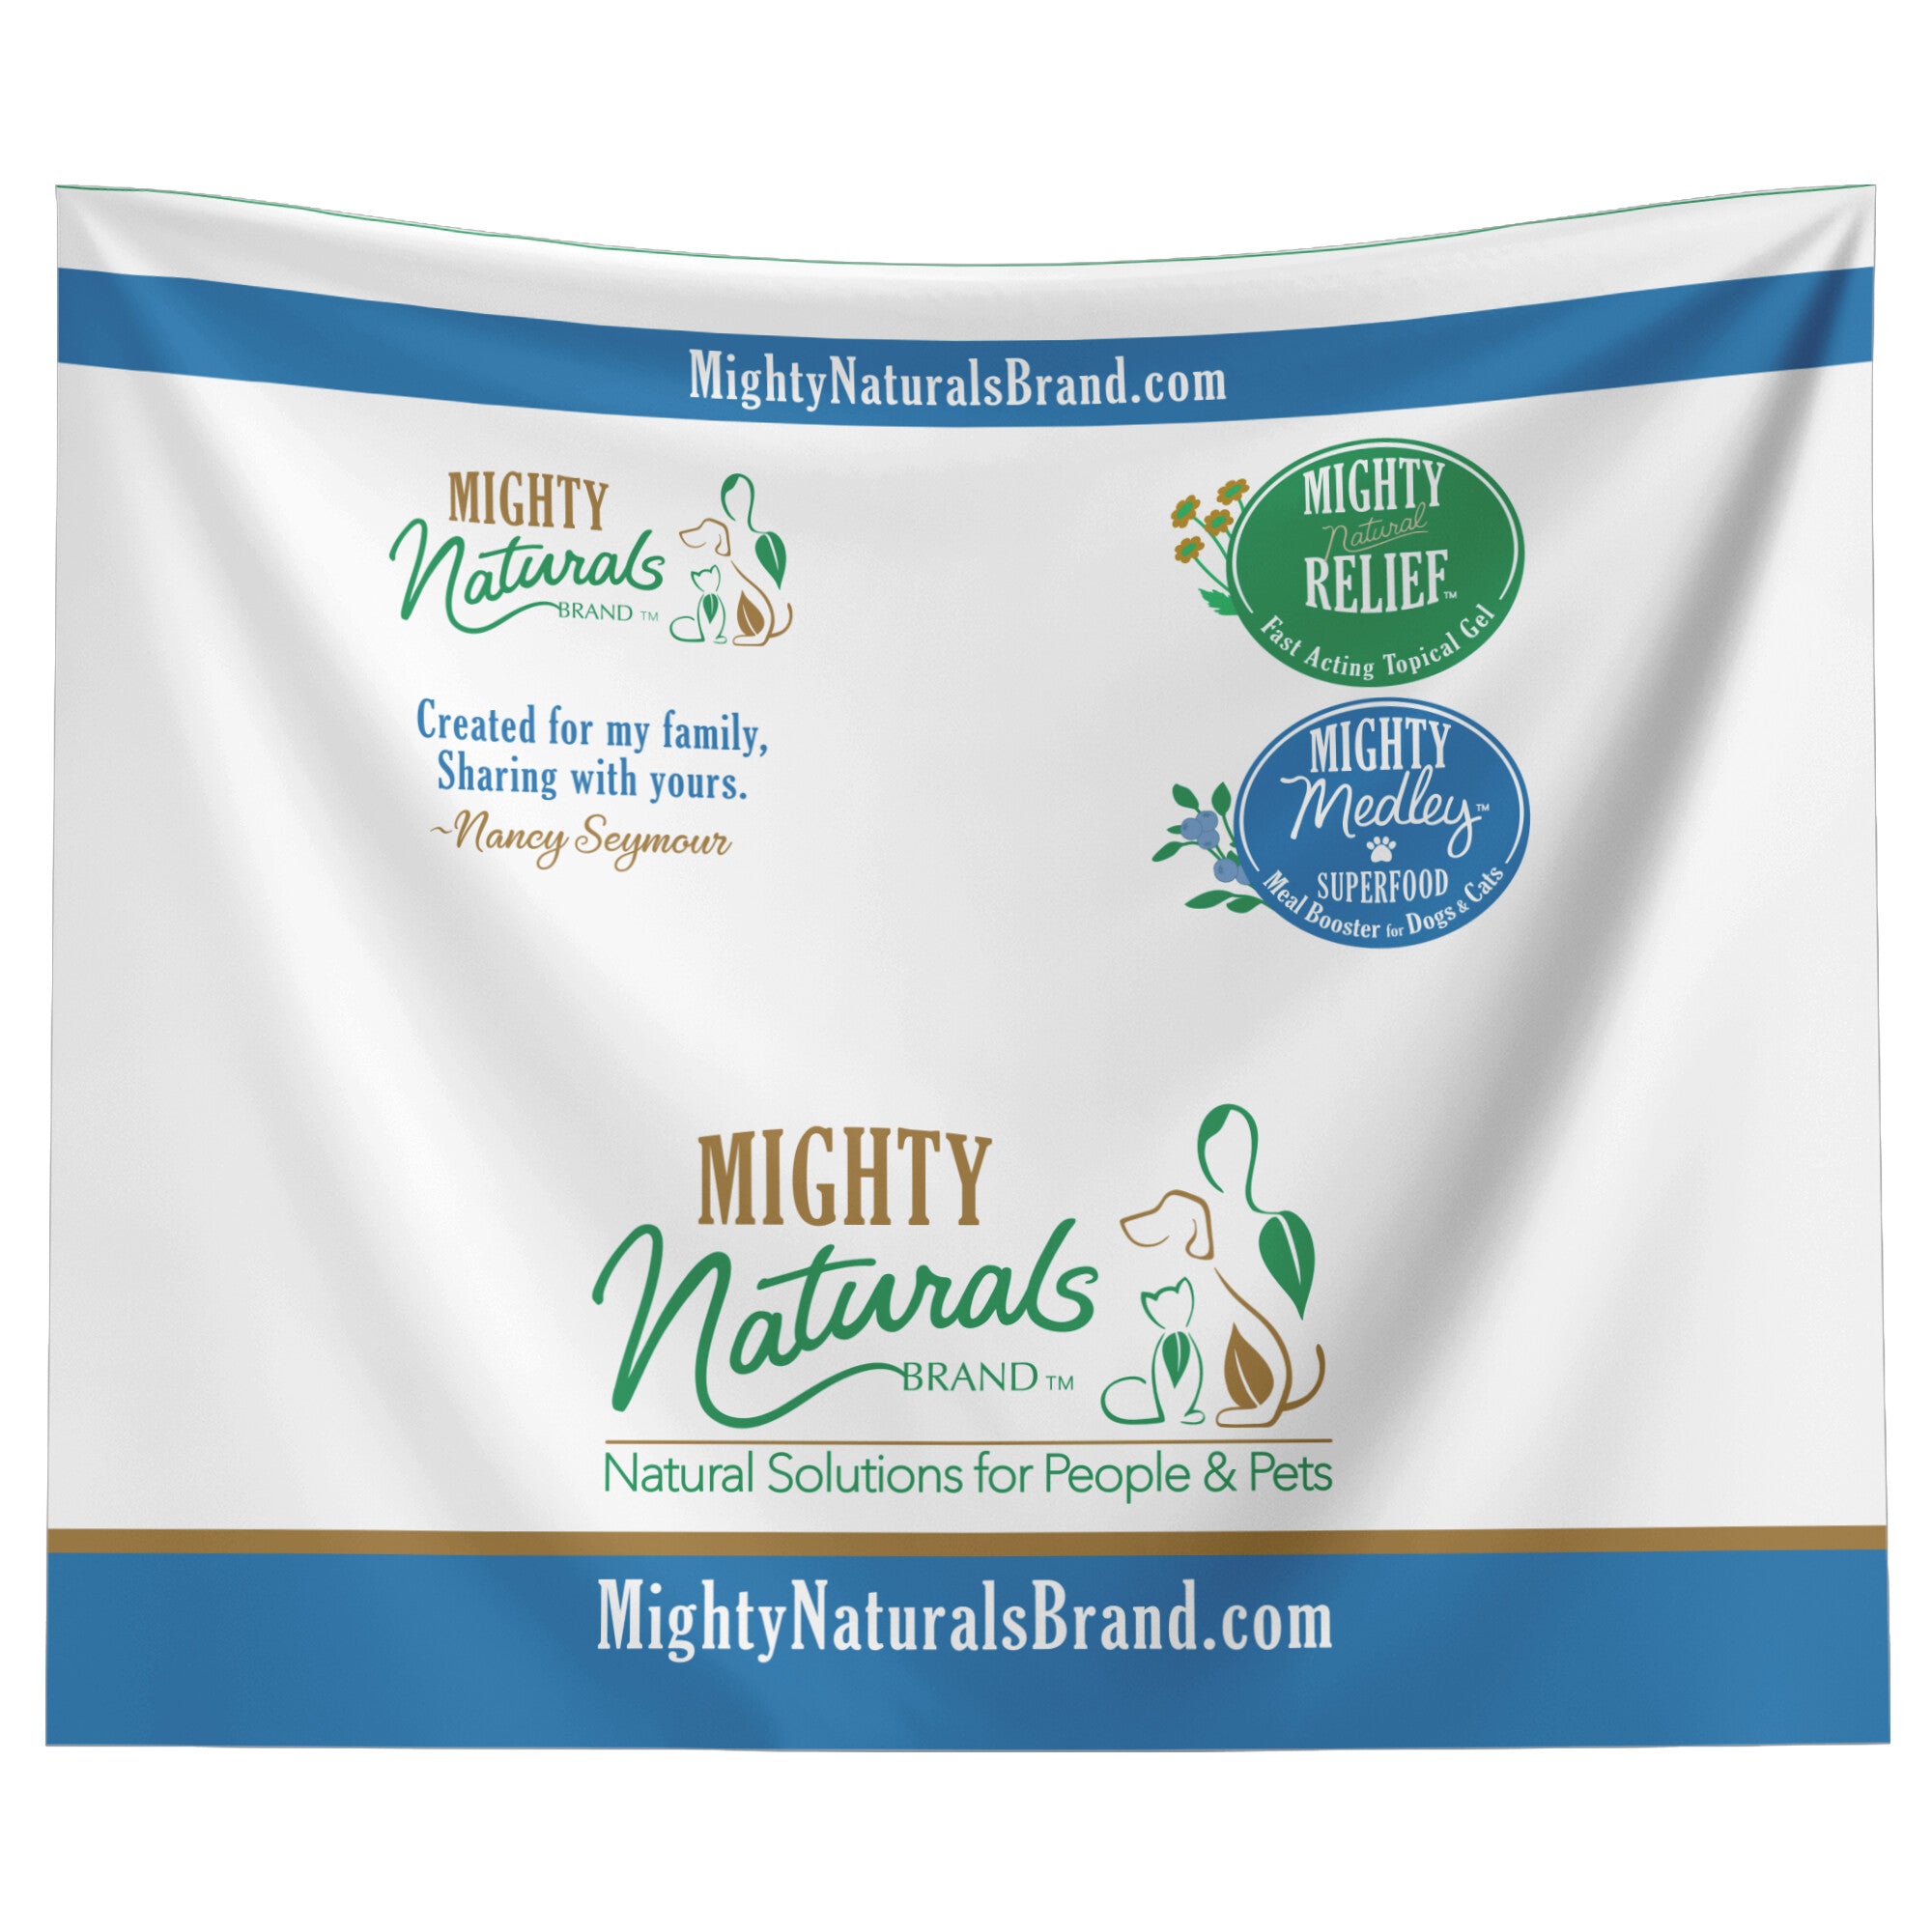 Mighty Naturals Brand Backdrop